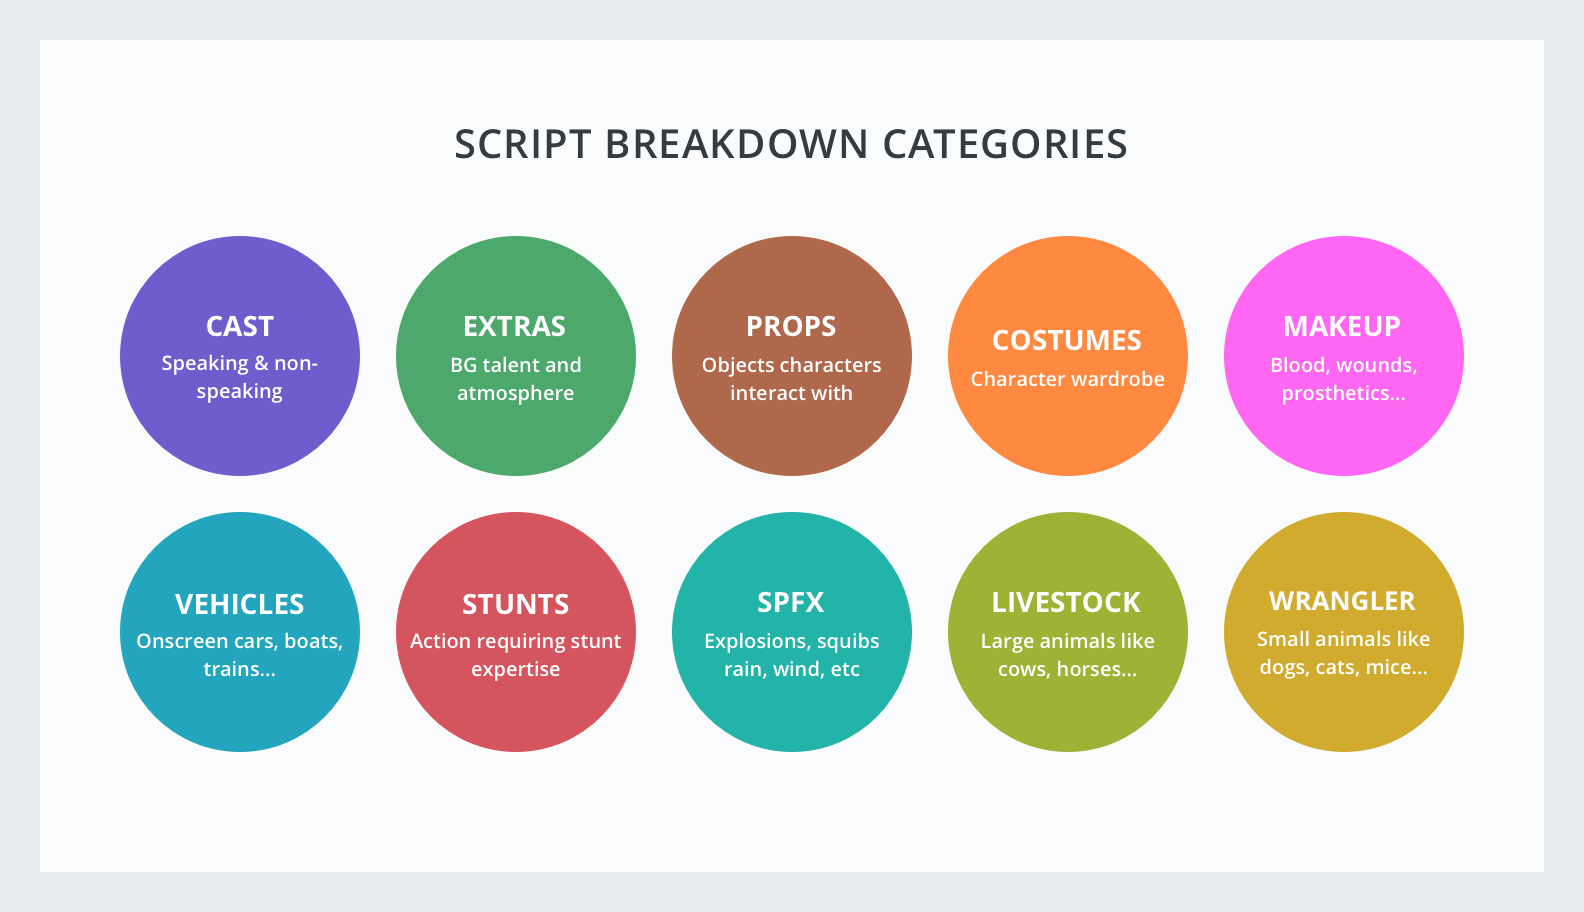 Production Scheduling Explained - How to Make a Scene Breakdown - Script Breakdown Colors - StudioBinder